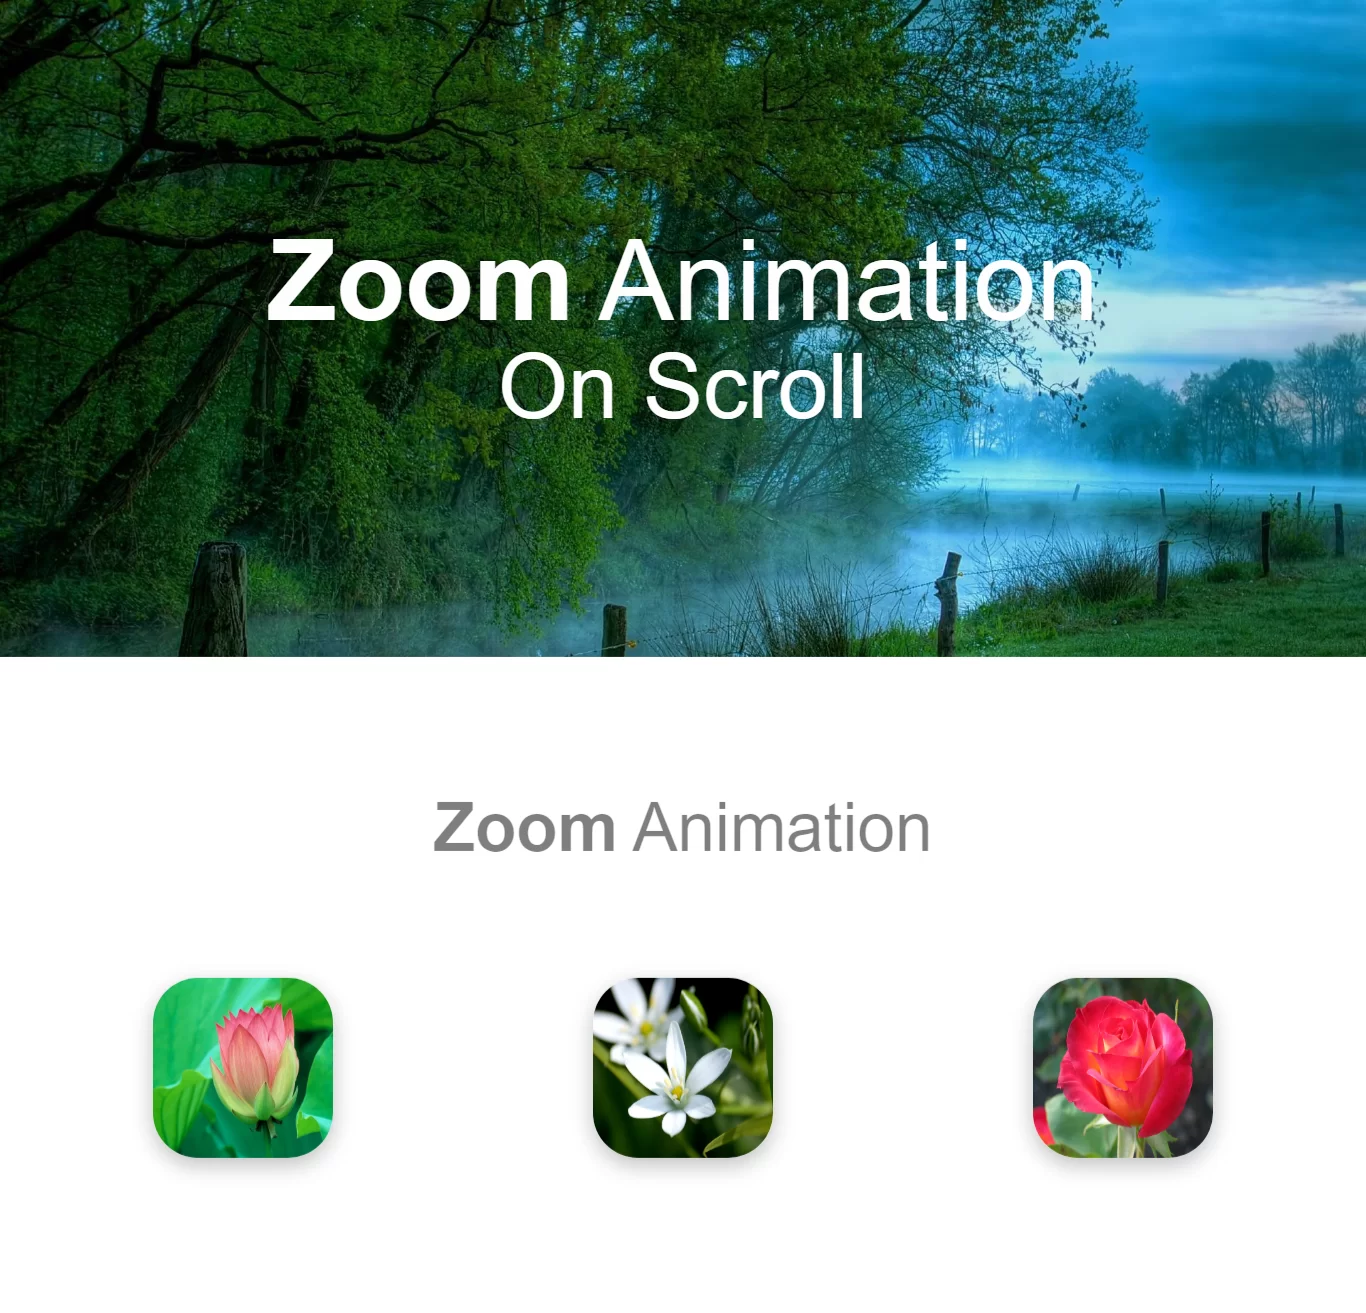 How Can I Create Zoom Animation On Scroll Using CSS